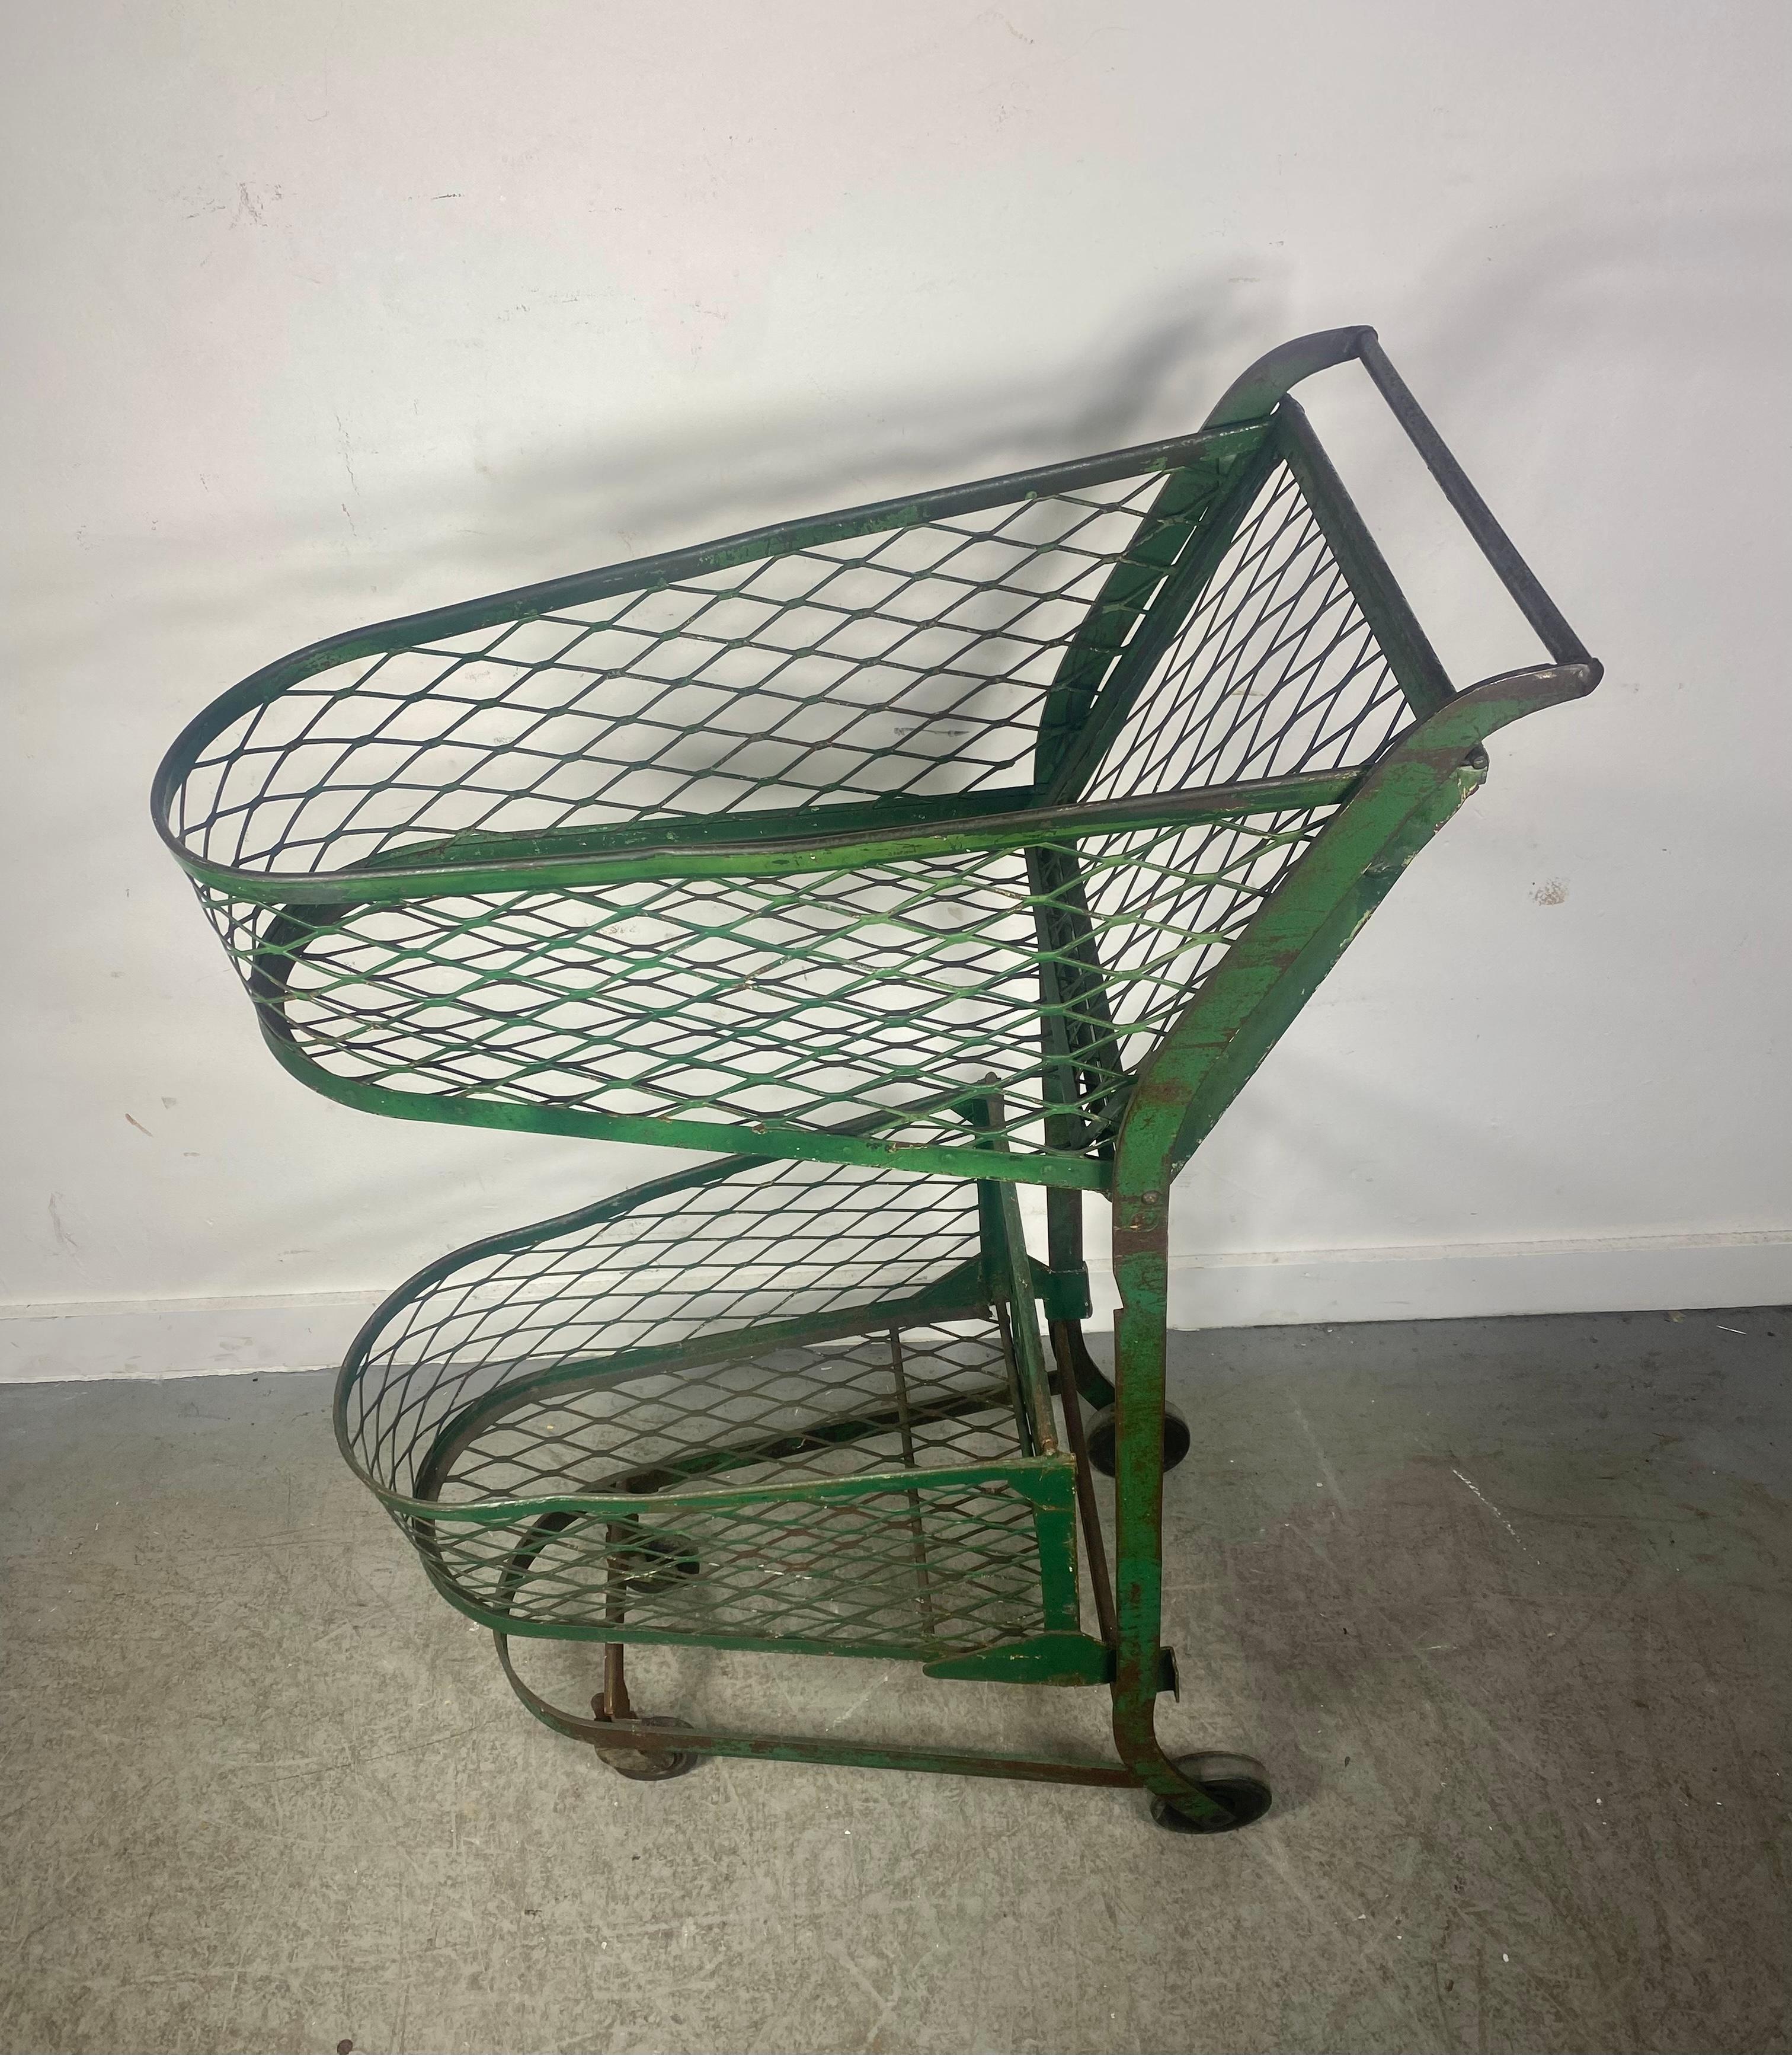 American Unusual Industrial Shopping Cart by Orla Watson , Telescope Cart Inc. For Sale